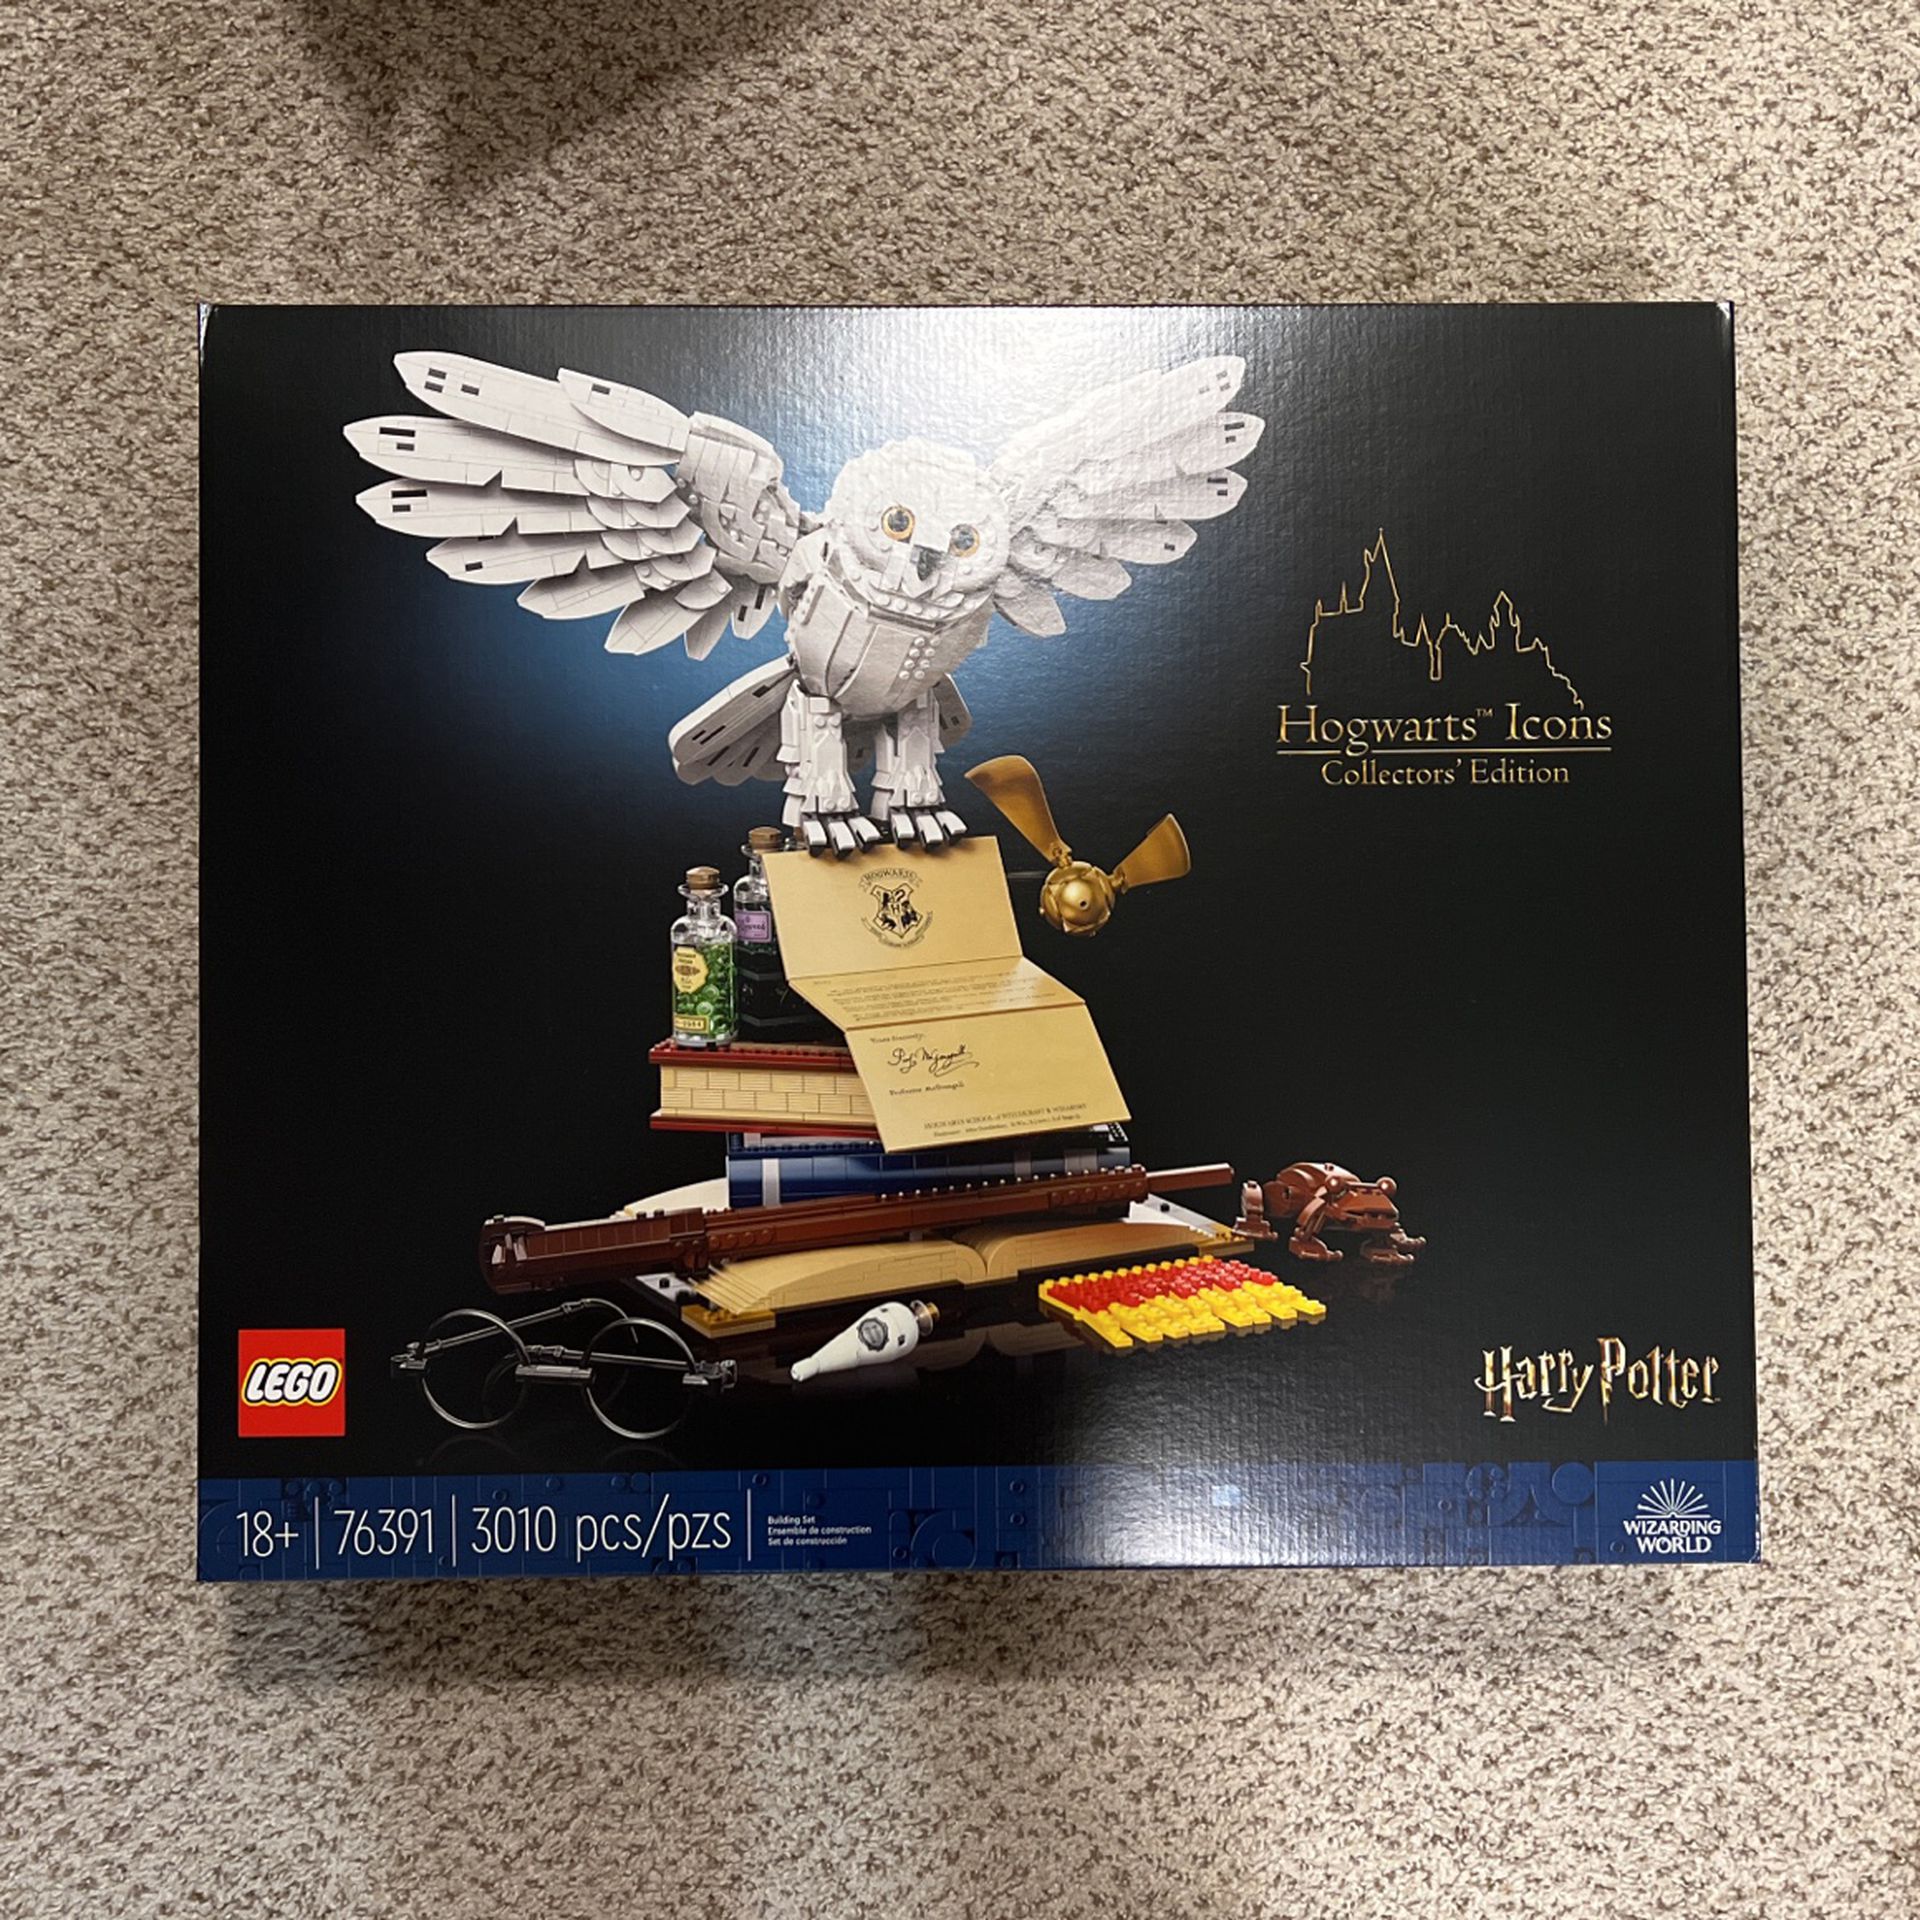 LEGO Hogwarts Icons Collectors’ Edition 76391 New & Sealed